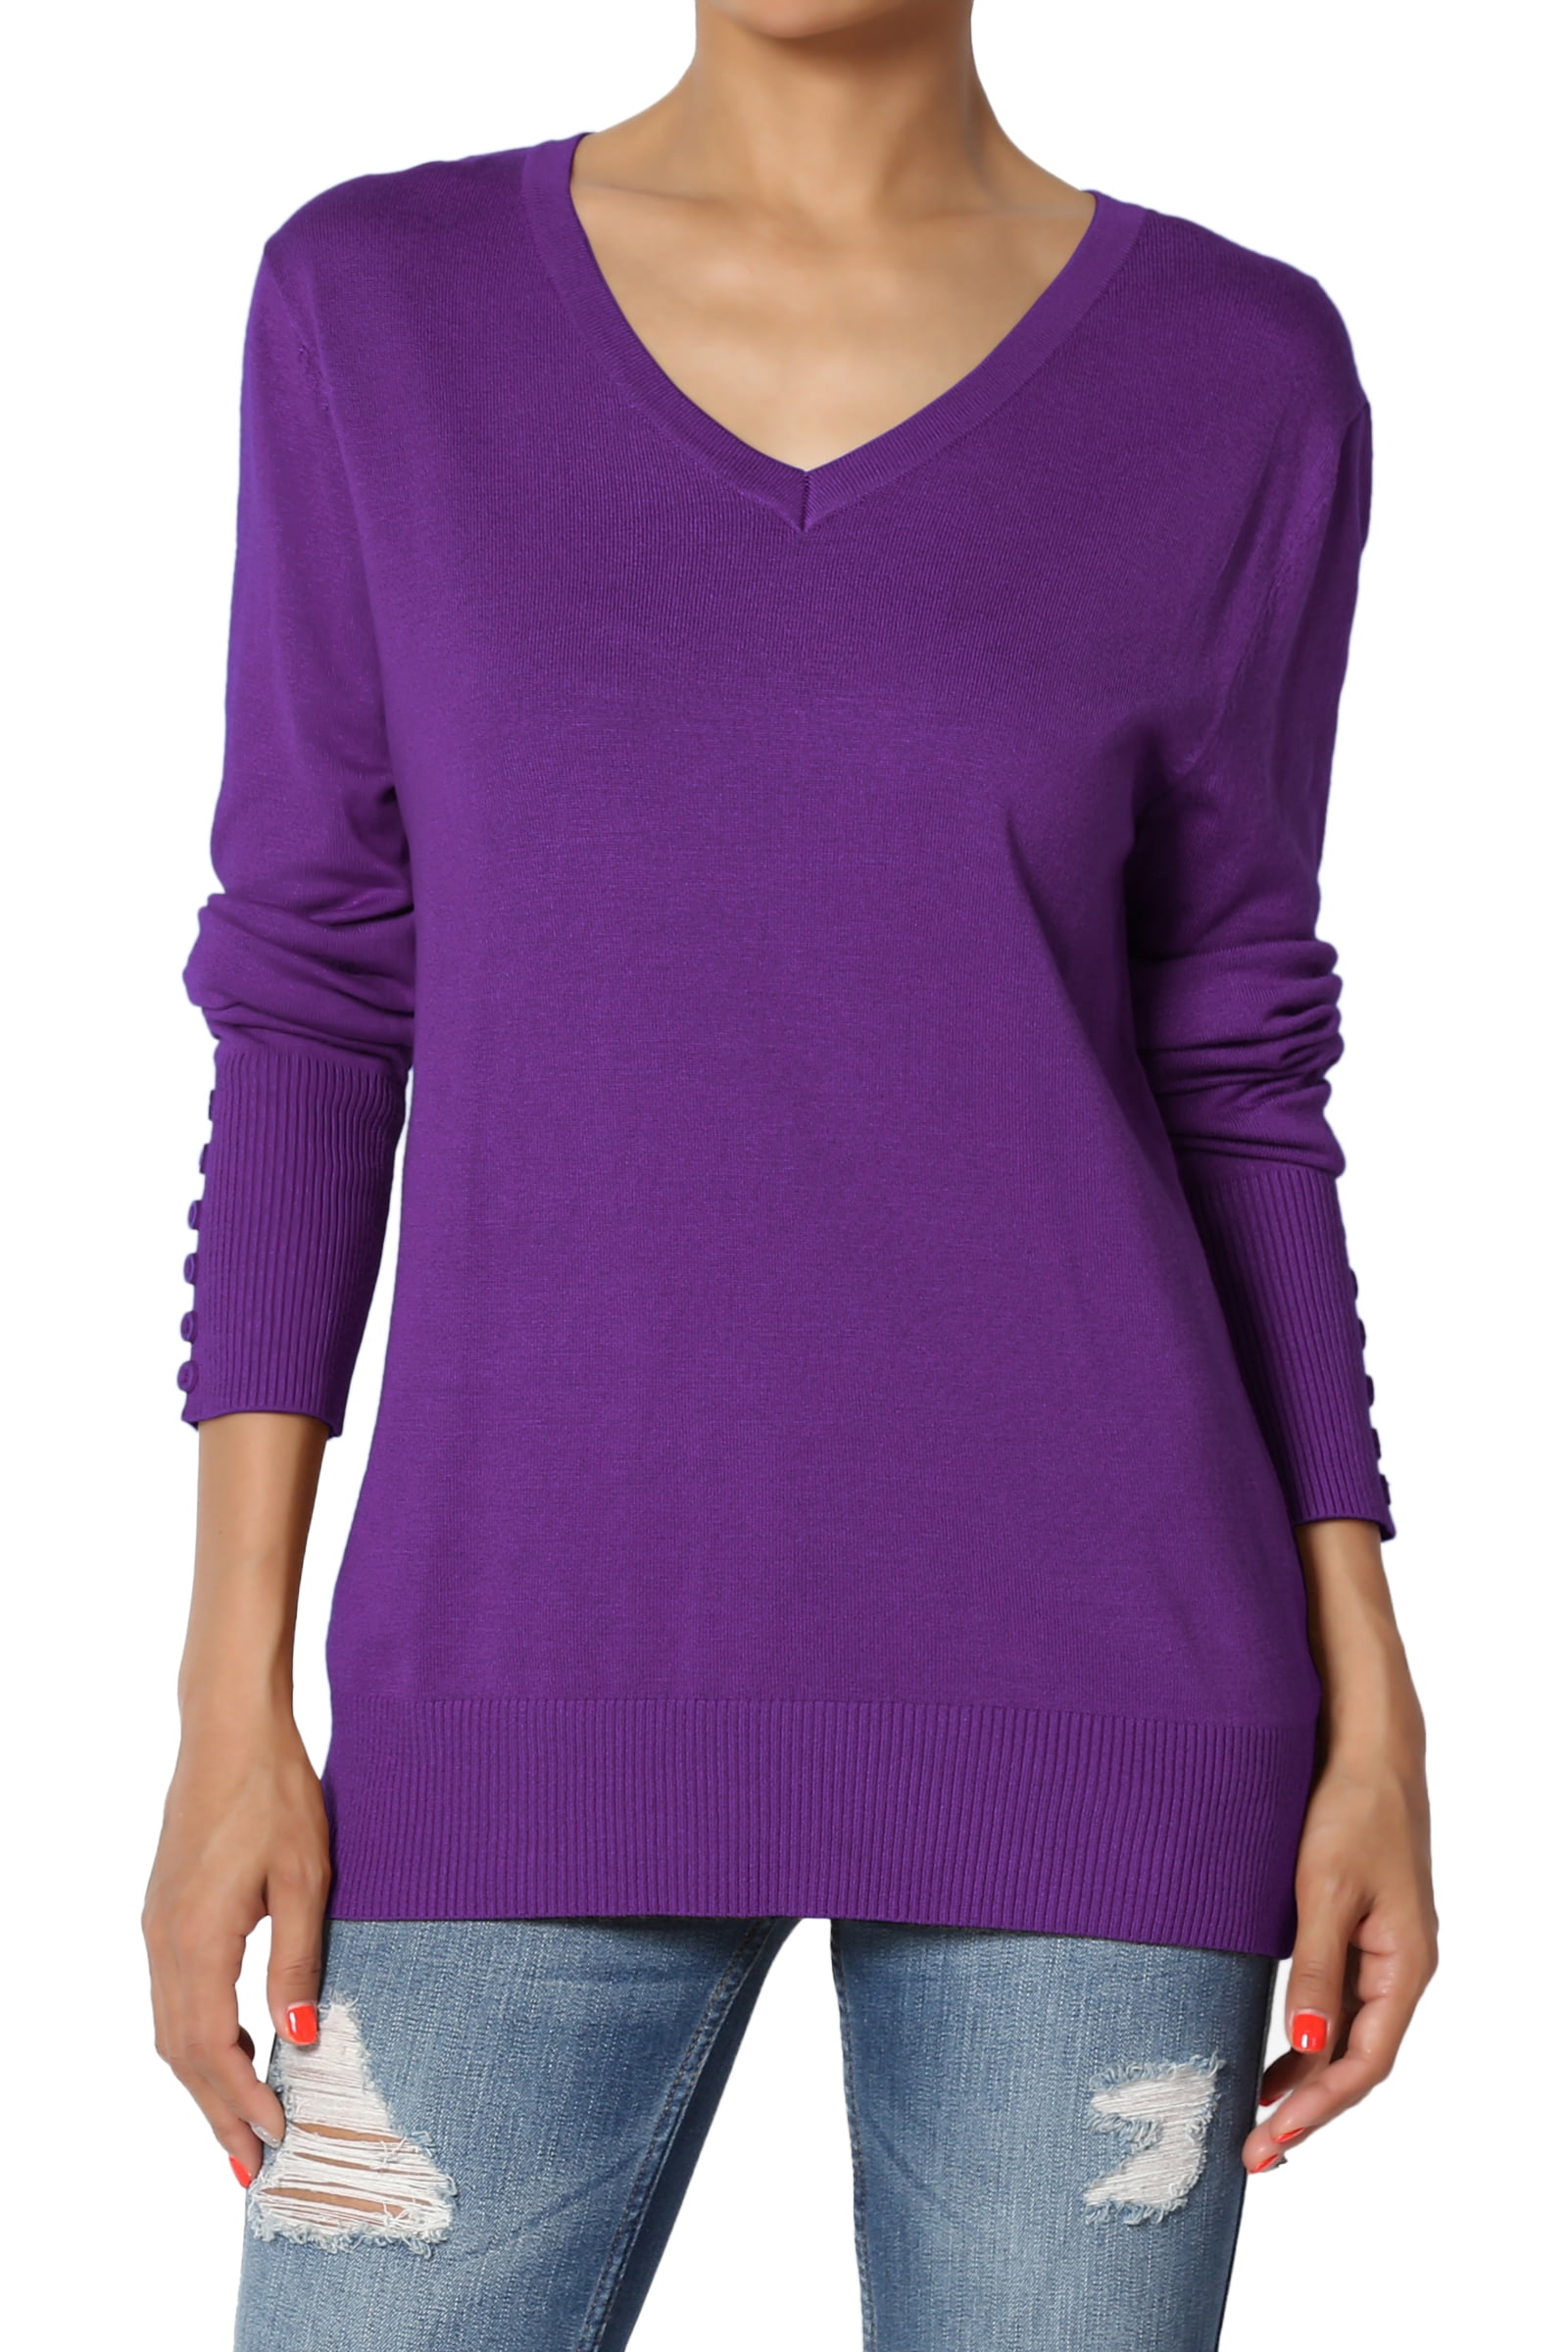 TheMogan Button Long Sleeve V-Neck Loose Fit Knit Pullover Sweater Top 